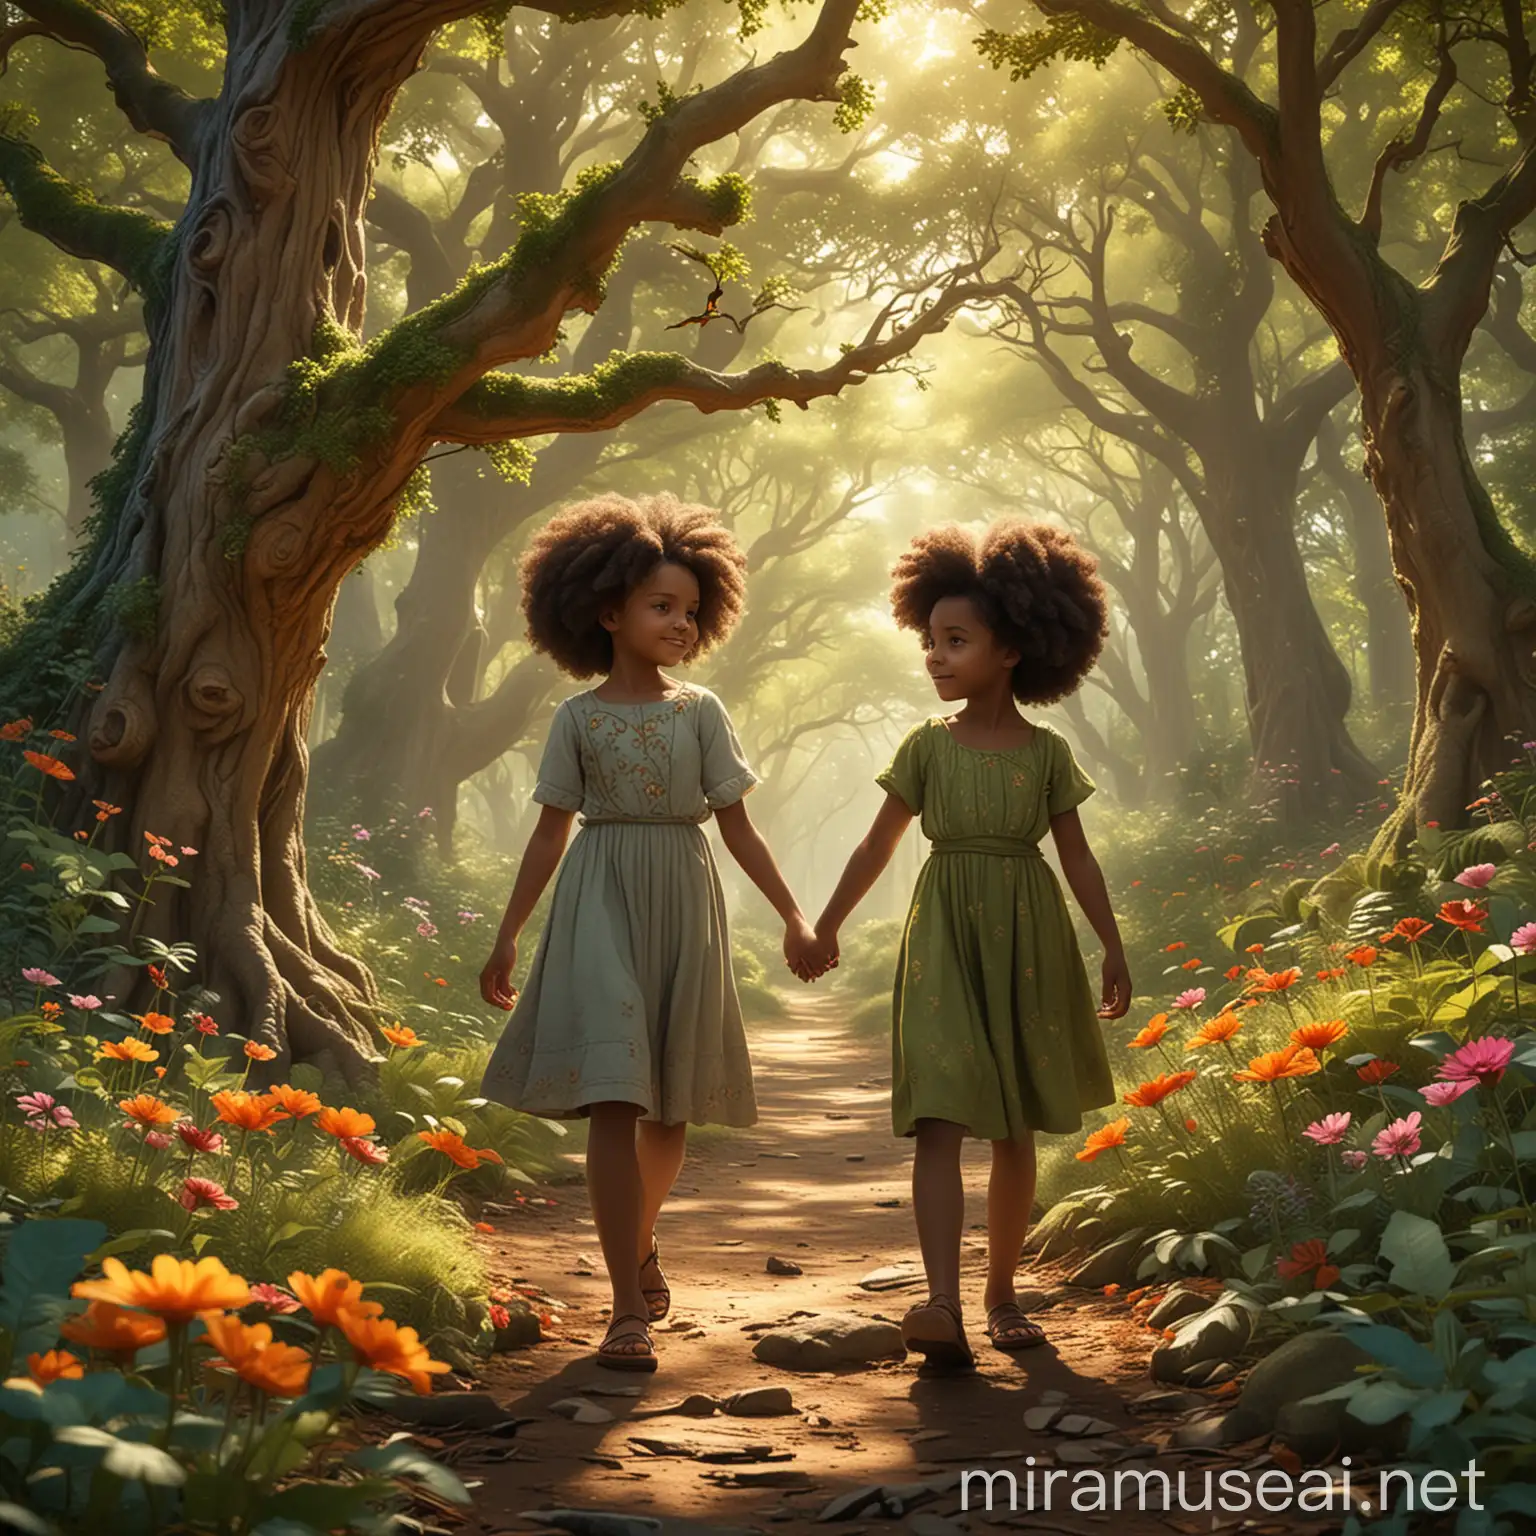 Create an illustration of two sisters named Djenna and Djoelia, with beautiful afro hairstyles, exploring a magical forest. Djenna, the older sister, is wise and thoughtful, while Djoelia, the younger sister, is energetic and adventurous. They are holding hands as they walk through a vibrant forest filled with majestic trees, colorful flowers, and singing birds. Near a large, ancient oak tree, they meet a wise tortoise named Tilly. The scene is filled with a sense of wonder and excitement as the sisters embark on their treasure hunt, guided by Tilly. The forest is bathed in warm sunlight, creating a magical atmosphere.